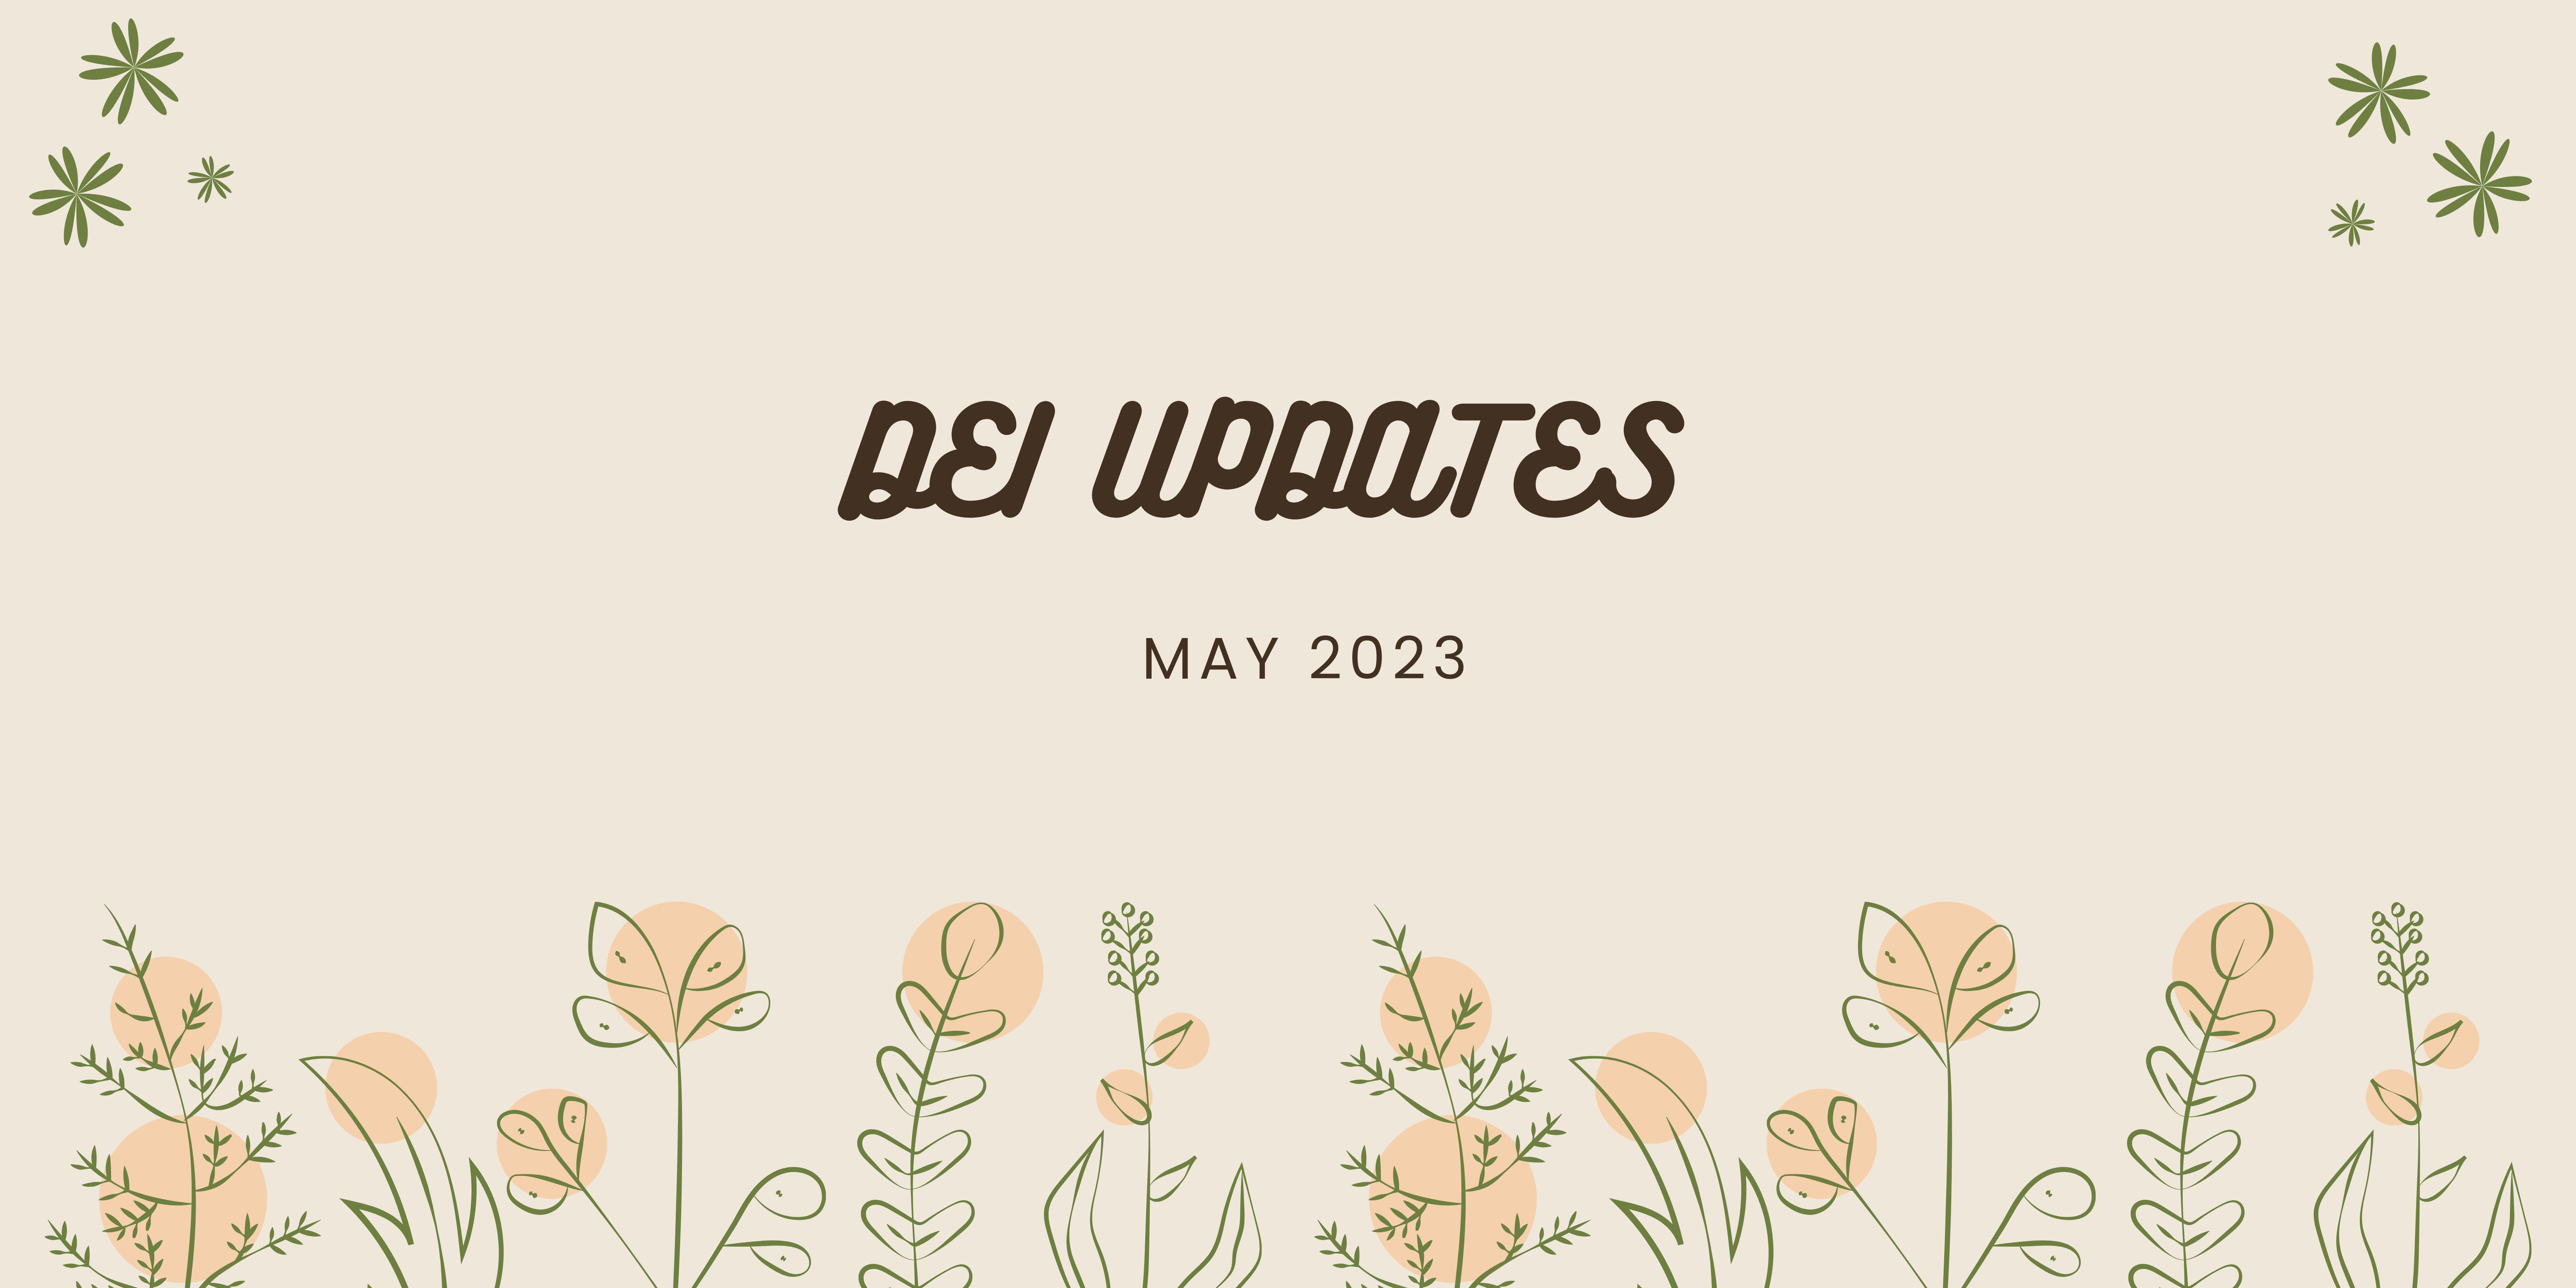 floral background, text reads, "DEI updates May 2023"